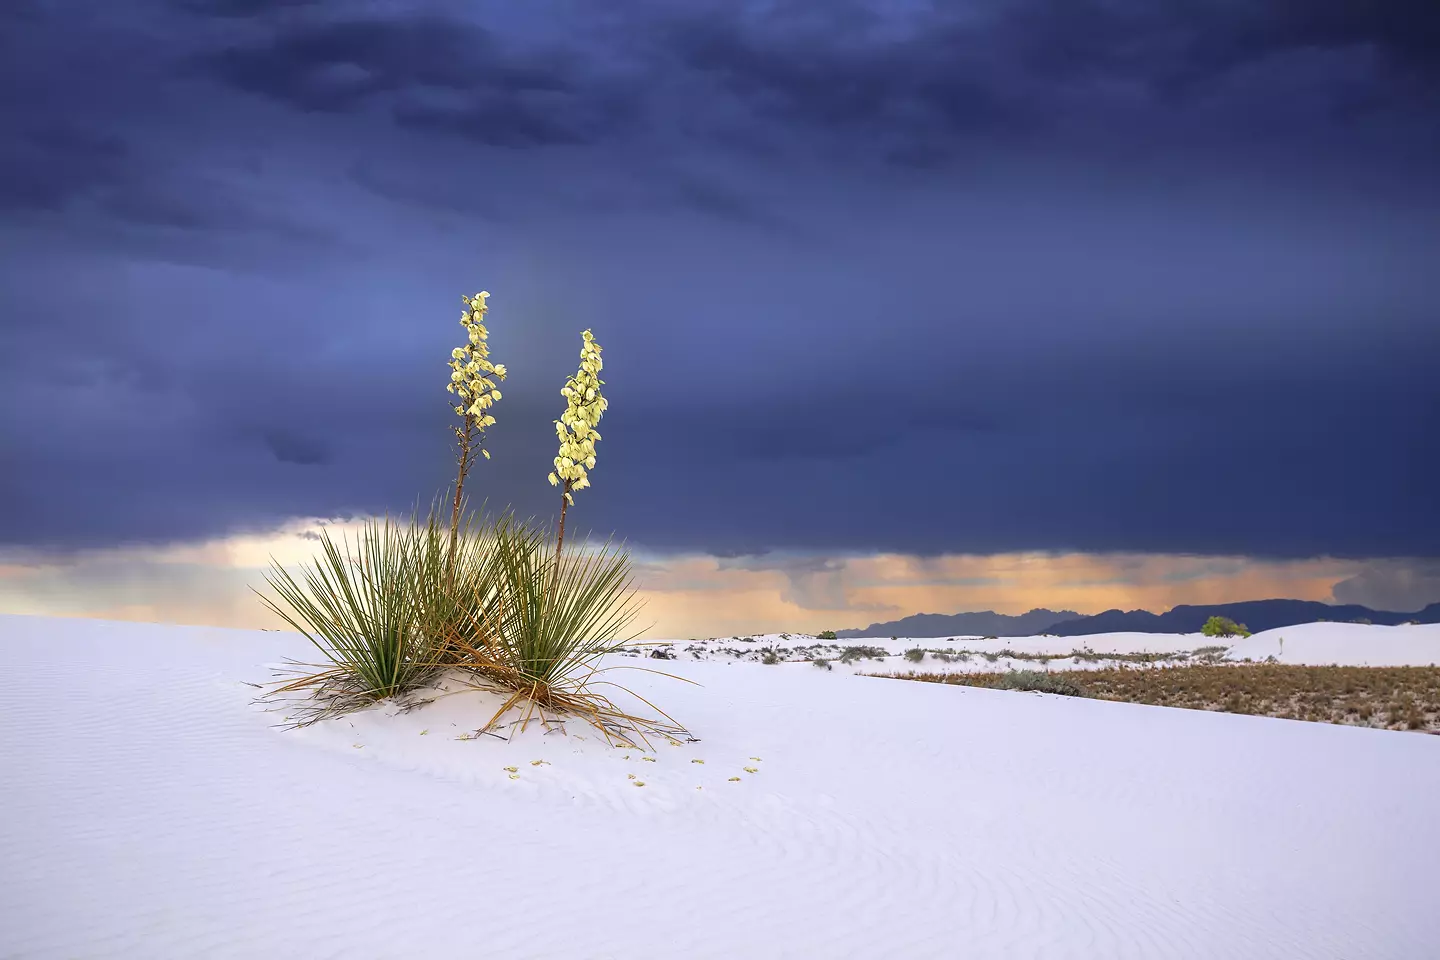 Spring flowers emerging from the sands in White Sands National Monument in New Mexico.